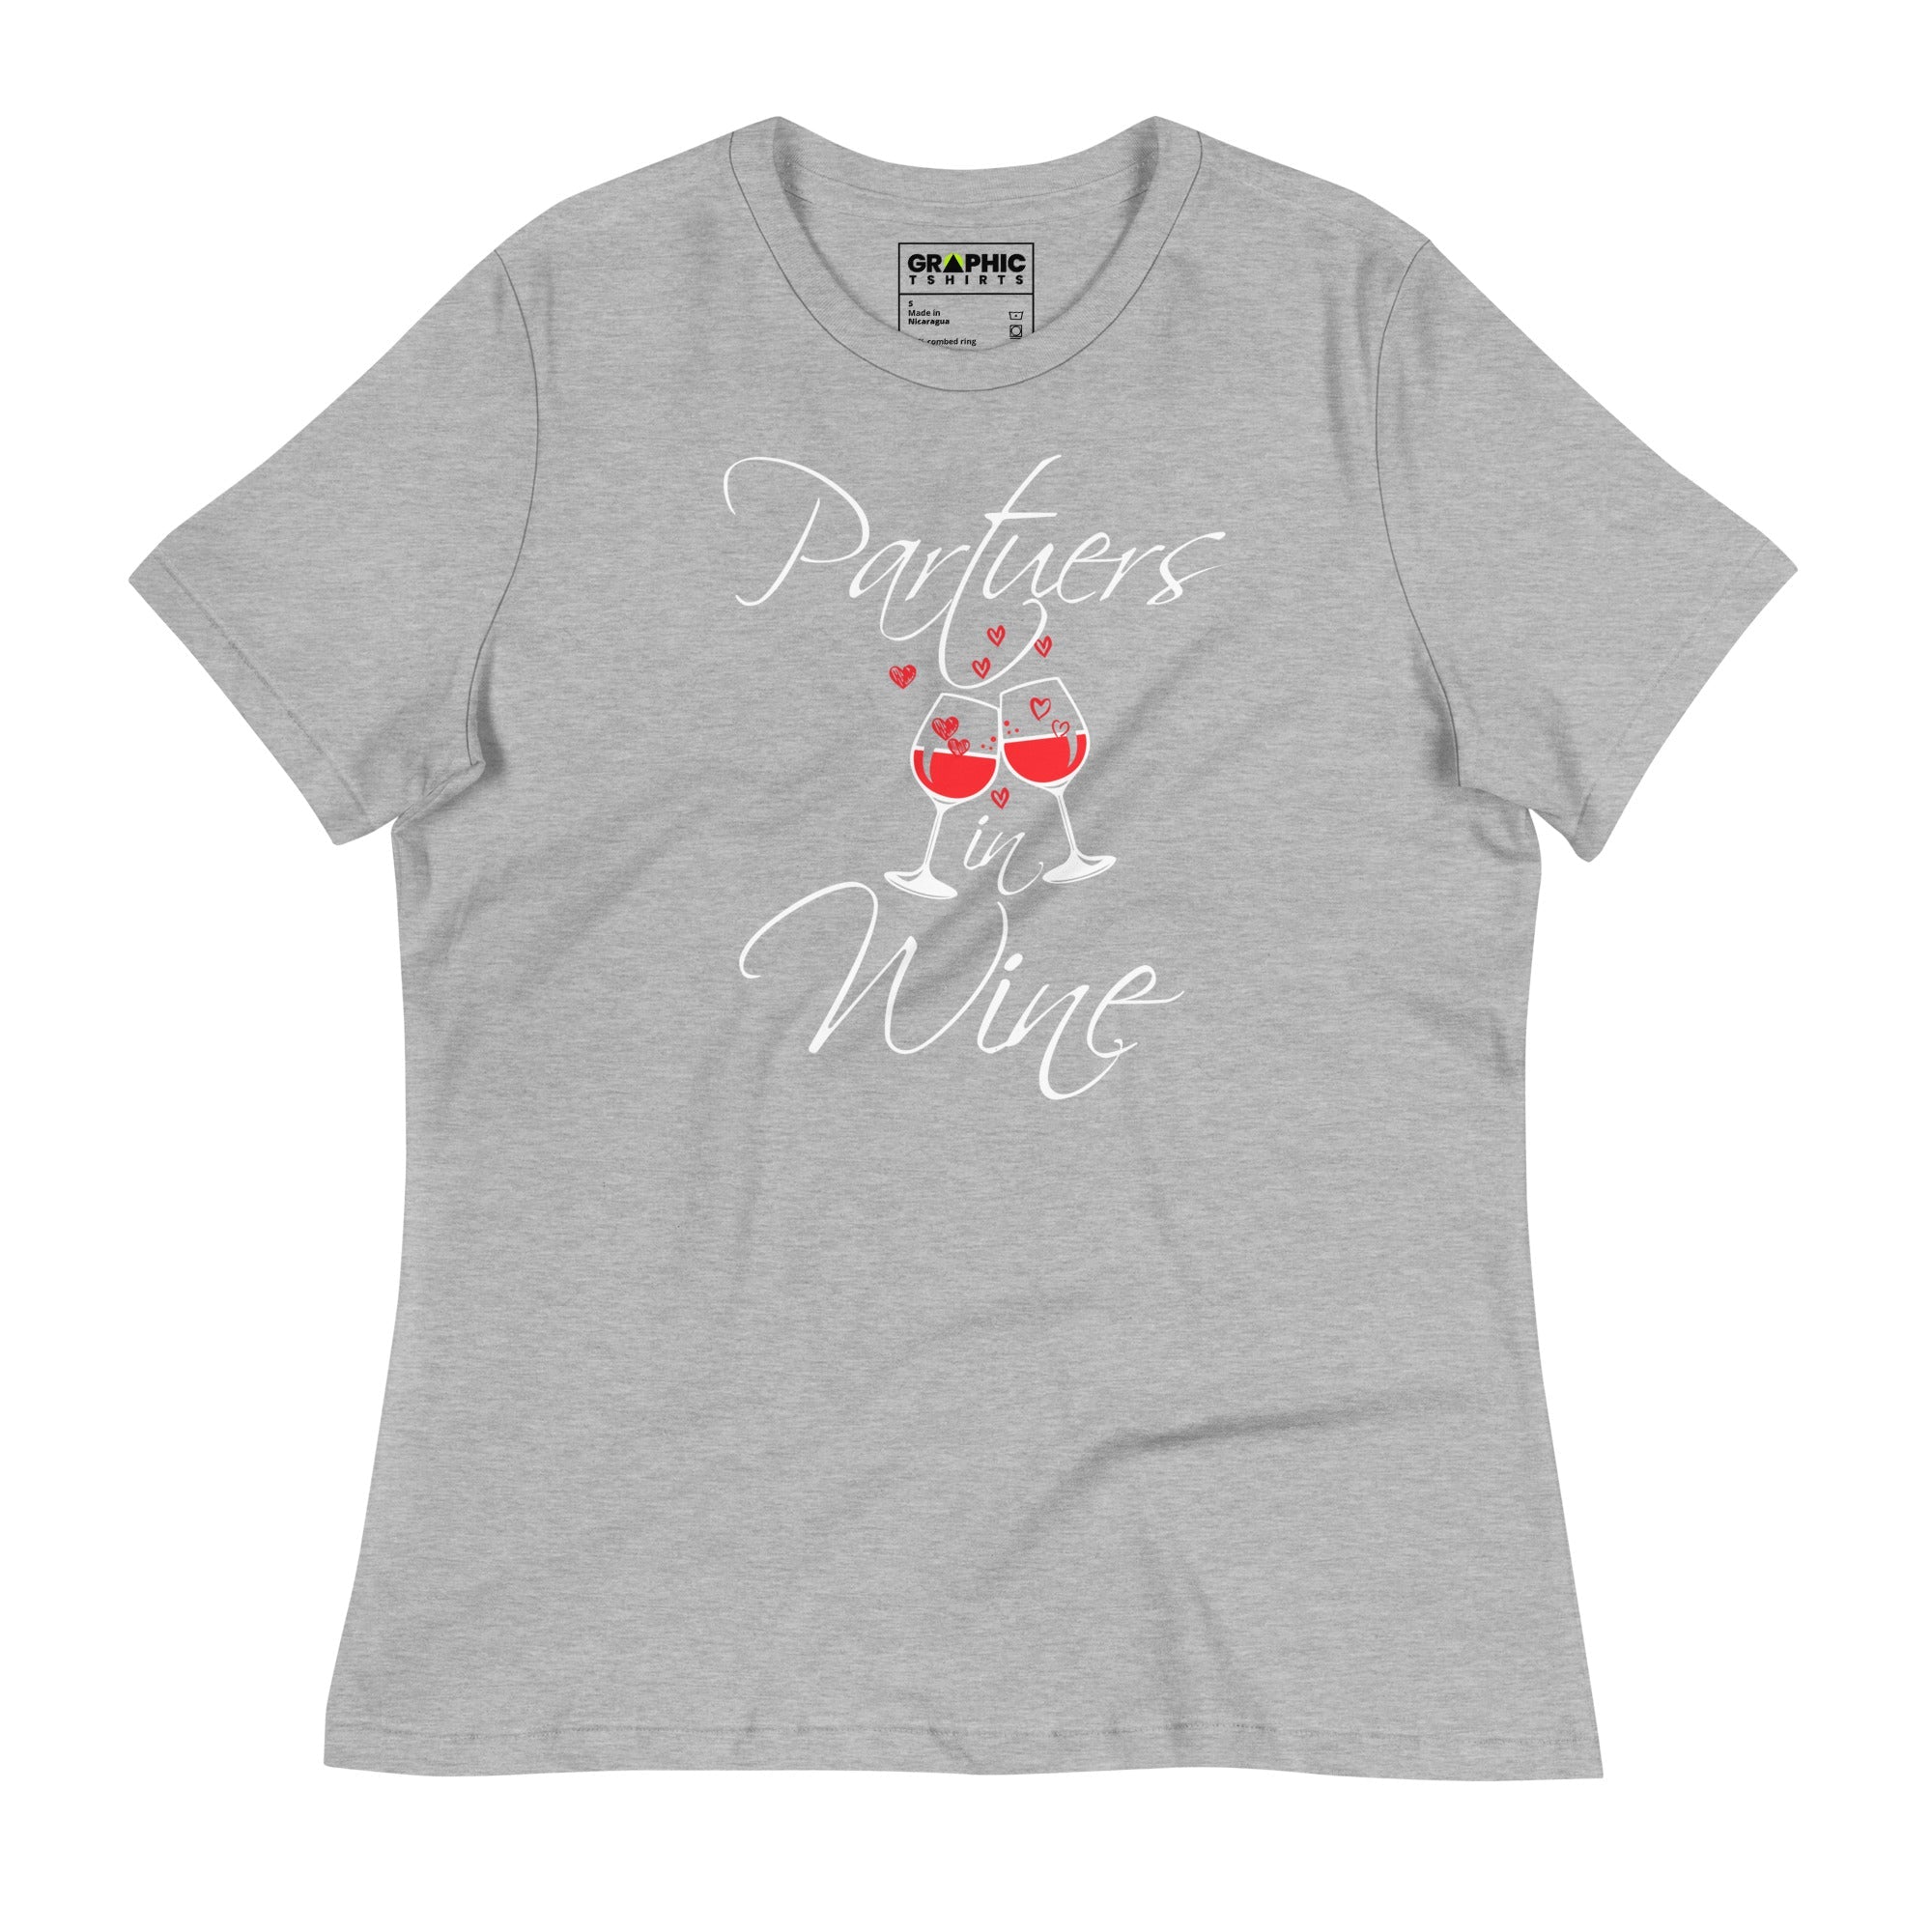 Women's Relaxed T-Shirt - Partners in Wine - GRAPHIC T-SHIRTS